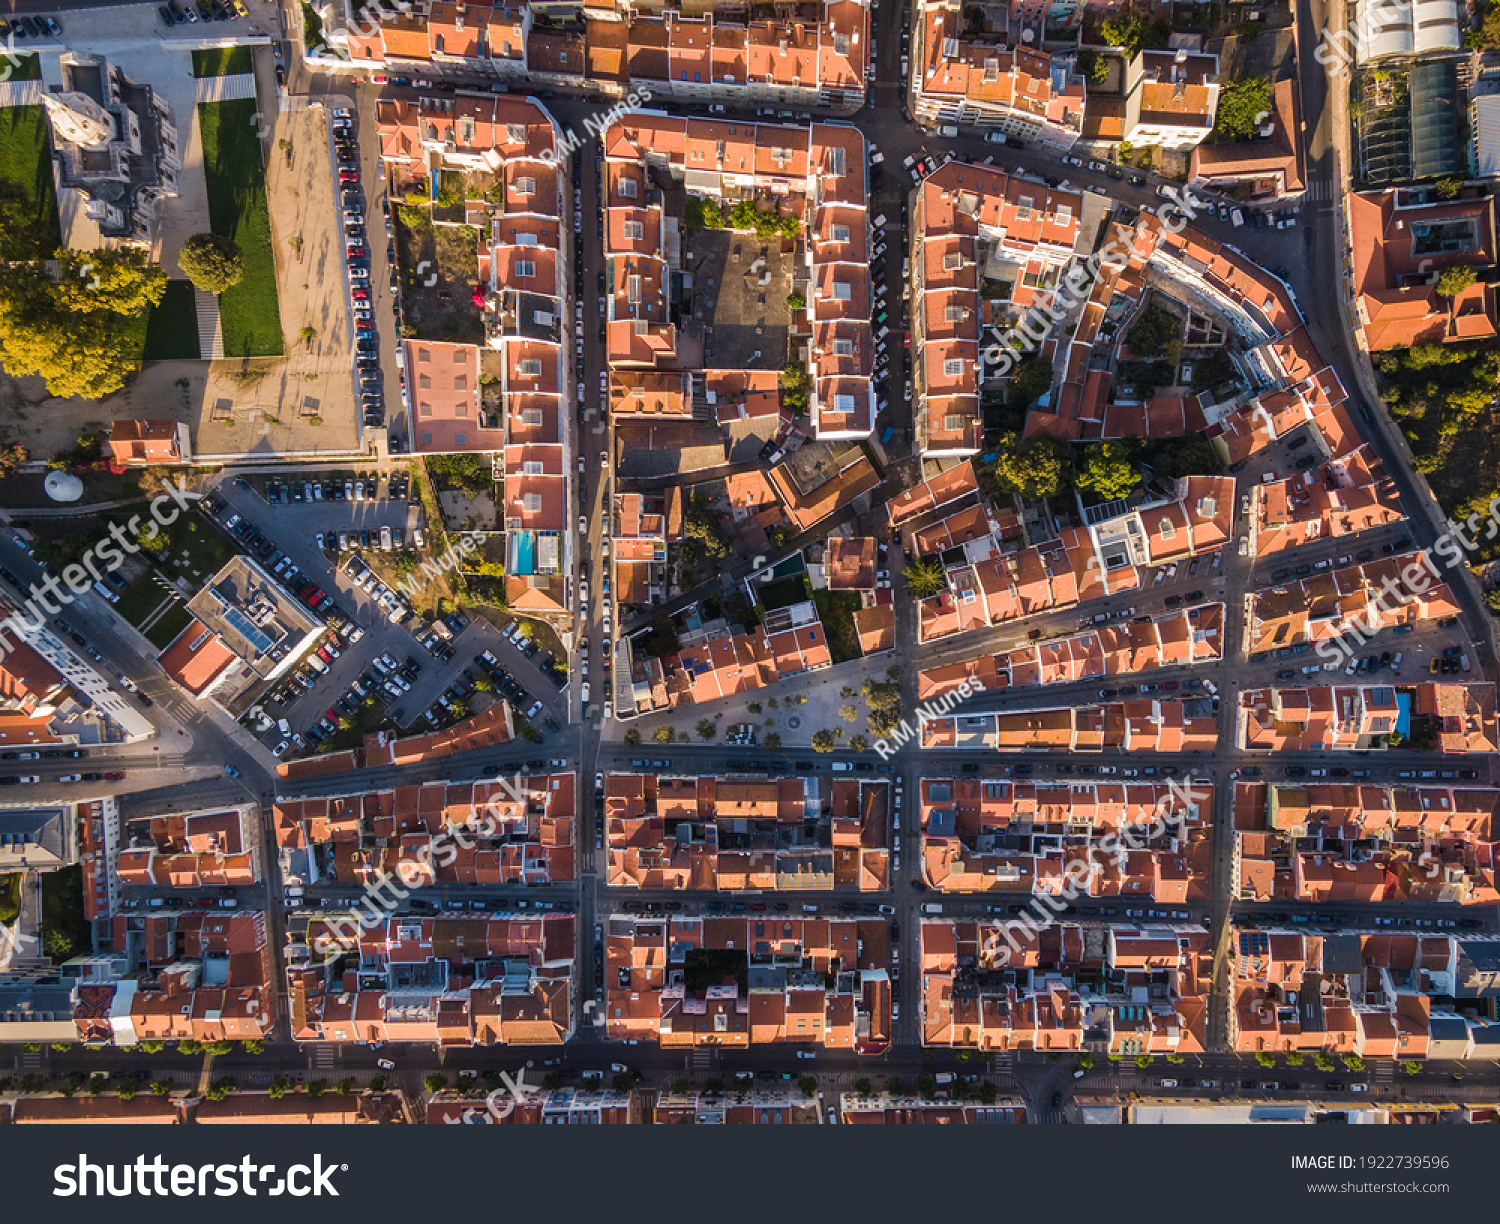 Aerial top down view of traditional residential neighbourhood during fall season in the Belem District of Lisbon, Portugal. #1922739596